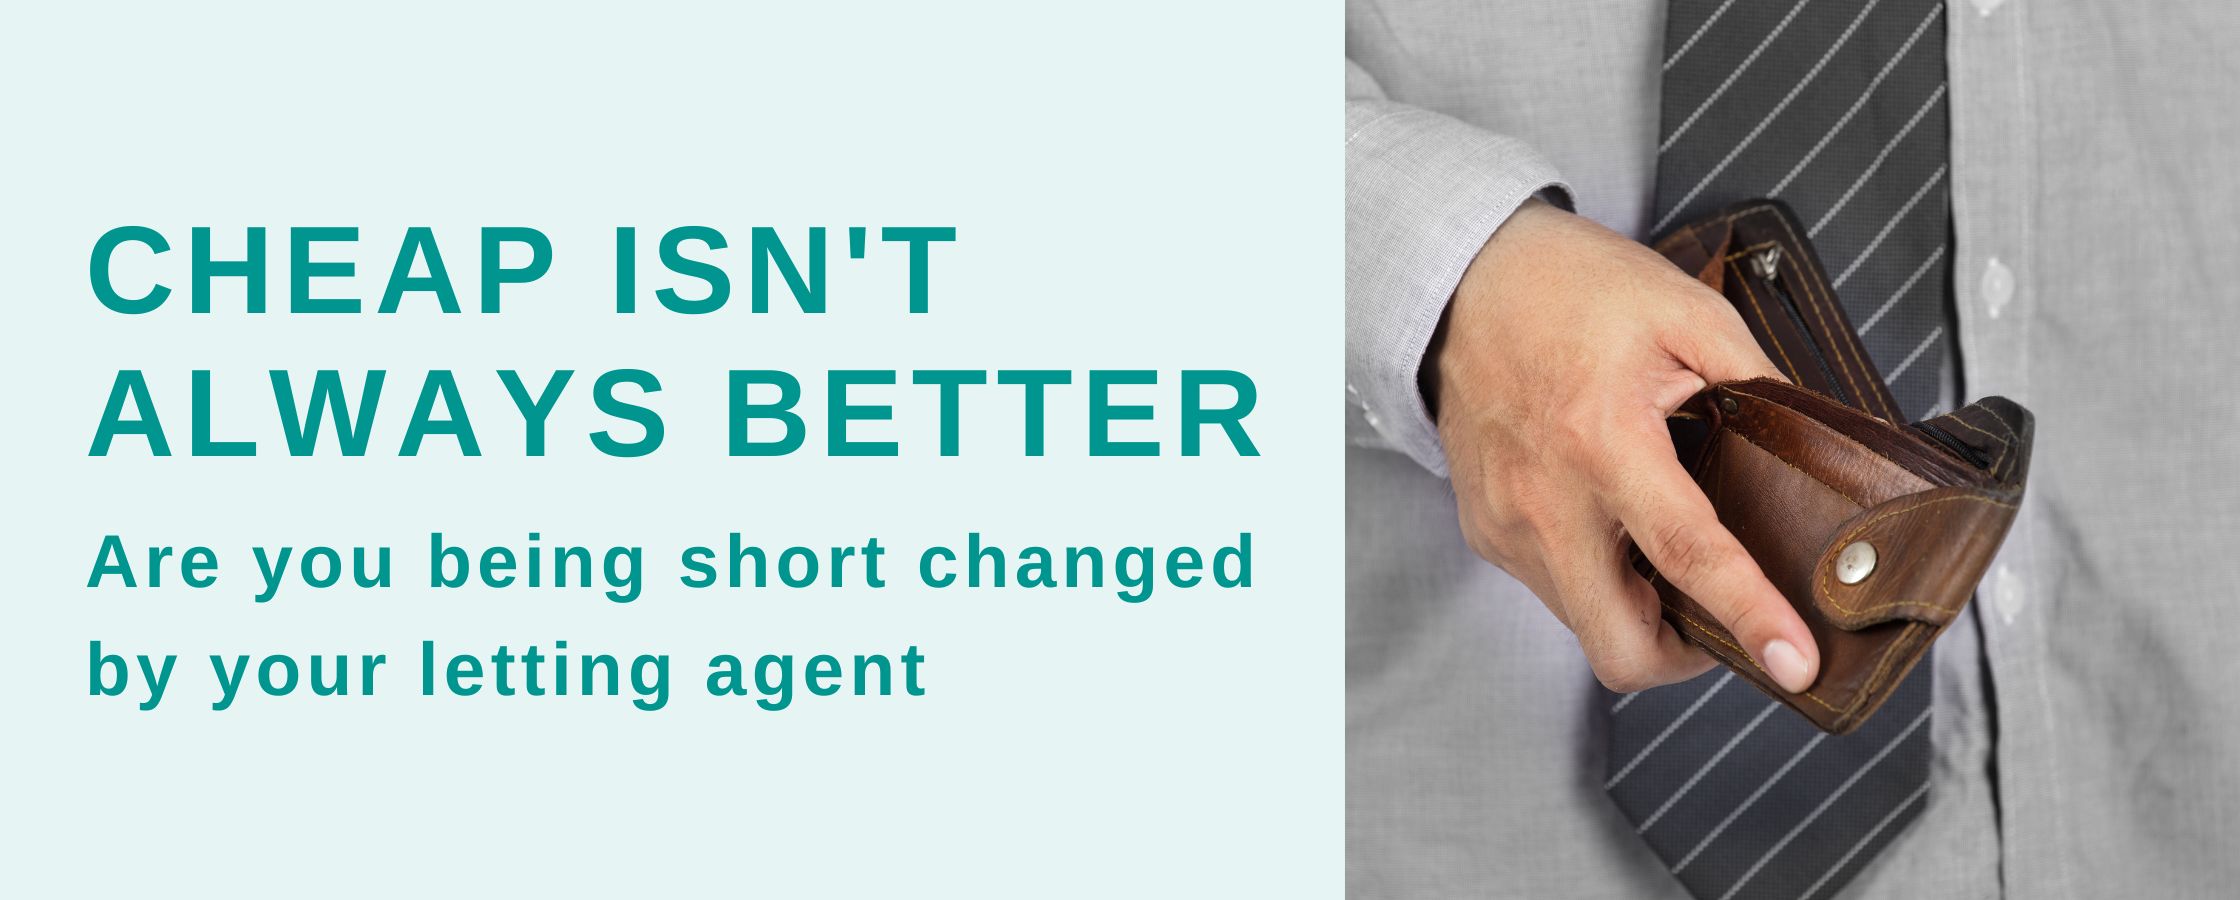 Cheap isn't always better. Are you being short changed by your letting agent?